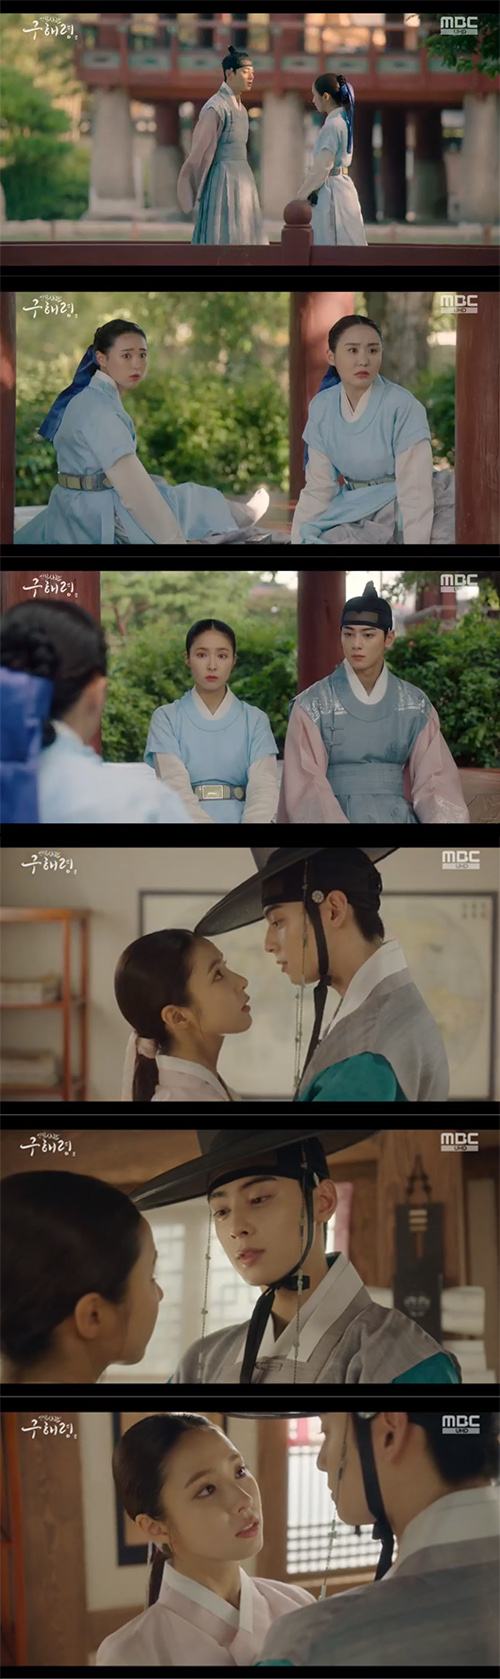 New officer Rookie Historian Goo Hae-ryung Cha Eun-woo is on the verge of playing Wedding Bible with another woman, not Shin Se-kyung.In MBC Wednesday-Thursday evening drama New cadet Rookie Historian Goo Hae-ryung broadcasted on the afternoon of the 4th, Lee Lim (Cha Eun-woo) was shown to reveal his relationship with Rookie Historian Goo Hae-ryung (Shin Se-kyung).On this day, Leeim went beyond the wall and called Rookie Historian Goo Hae-ryung.Its just a place where the girls are, Rookie Historian Goo Hae-ryung said, surprised.In the advent of Lee Rim, Rookie Historian Goo Hae-ryung hastily cleared the room.Irim looked around the room carefully, and Rookie Historian Goo Hae-ryung asked, Why are you so scoured, youre not new?Lee said, At that time, it was a Gussari room and now it is my GLOW room.In the words of Rookie Historian Goo Hae-ryung, What if you have decided, I want to see it every day.I do not have a priest or a coroner, he said, wrapping his waist and hugging him.Lee Rim and Rookie Historian Goo Hae-ryung, who continued their secret love affair, went on a date for the sparsely populated sperm.At the end of the day, Oh Eun-im (Lee Ye-rim) and Hearan (Jang Yu-bin) were resting for a while.When did you two meet? He said, Did you even hold your hand and kiss it?Rookie Historian Goo Hae-ryung excused never happened that way, but Irim said he did and was in love with the first moment I saw it.Rookie Historian Goo Hae-ryung has already been in the country, so please do not take the dinner, but just leave the work.At this time, the Nine of the Green Sea also overheard the conversation, and Rookie Historian Goo Hae-ryung picked up our Sejo of Joseon.I have such a pretty face, and all the men would have been laughing. Oh Eun-im and Hurran said, Sejo of Joseon is a good-looking man even if you look at it sideways.Its good to have a colleague who can talk about Sejo of Joseon now, said Rookie Historian Goo Hae-ryung, who was caught in a secret love affair.Irim also expressed his affection more actively to Rookie Historian Goo Hae-ryung.However, Lee (Kim Min-sang) prepared the wedding of Sejo of Joseon, and Lim (Kim Yeo-jin) agreed.However, he said, I have been able to do the Wedding Bible of the city, but I do not intend to leave it to the master.Hussambo (Sung Ji-ru) immediately informed this: Rookie Historian Goo Hae-ryung heard the story, and left, saying I am reducing it.Irim followed, and said, I dont marry anyone.Irim went to see Mr. Lim with Rookie Historian Goo Hae-ryung.I already have a GLOW in my mind, Irim said. I love it so deeply that I do not want it or anyone else.Meanwhile, MBC Wednesday-Thursday evening drama New Entrepreneur Rookie Historian Goo Hae-ryung will be broadcast at 8:55 pm.Photo  MBC Broadcasting Screen